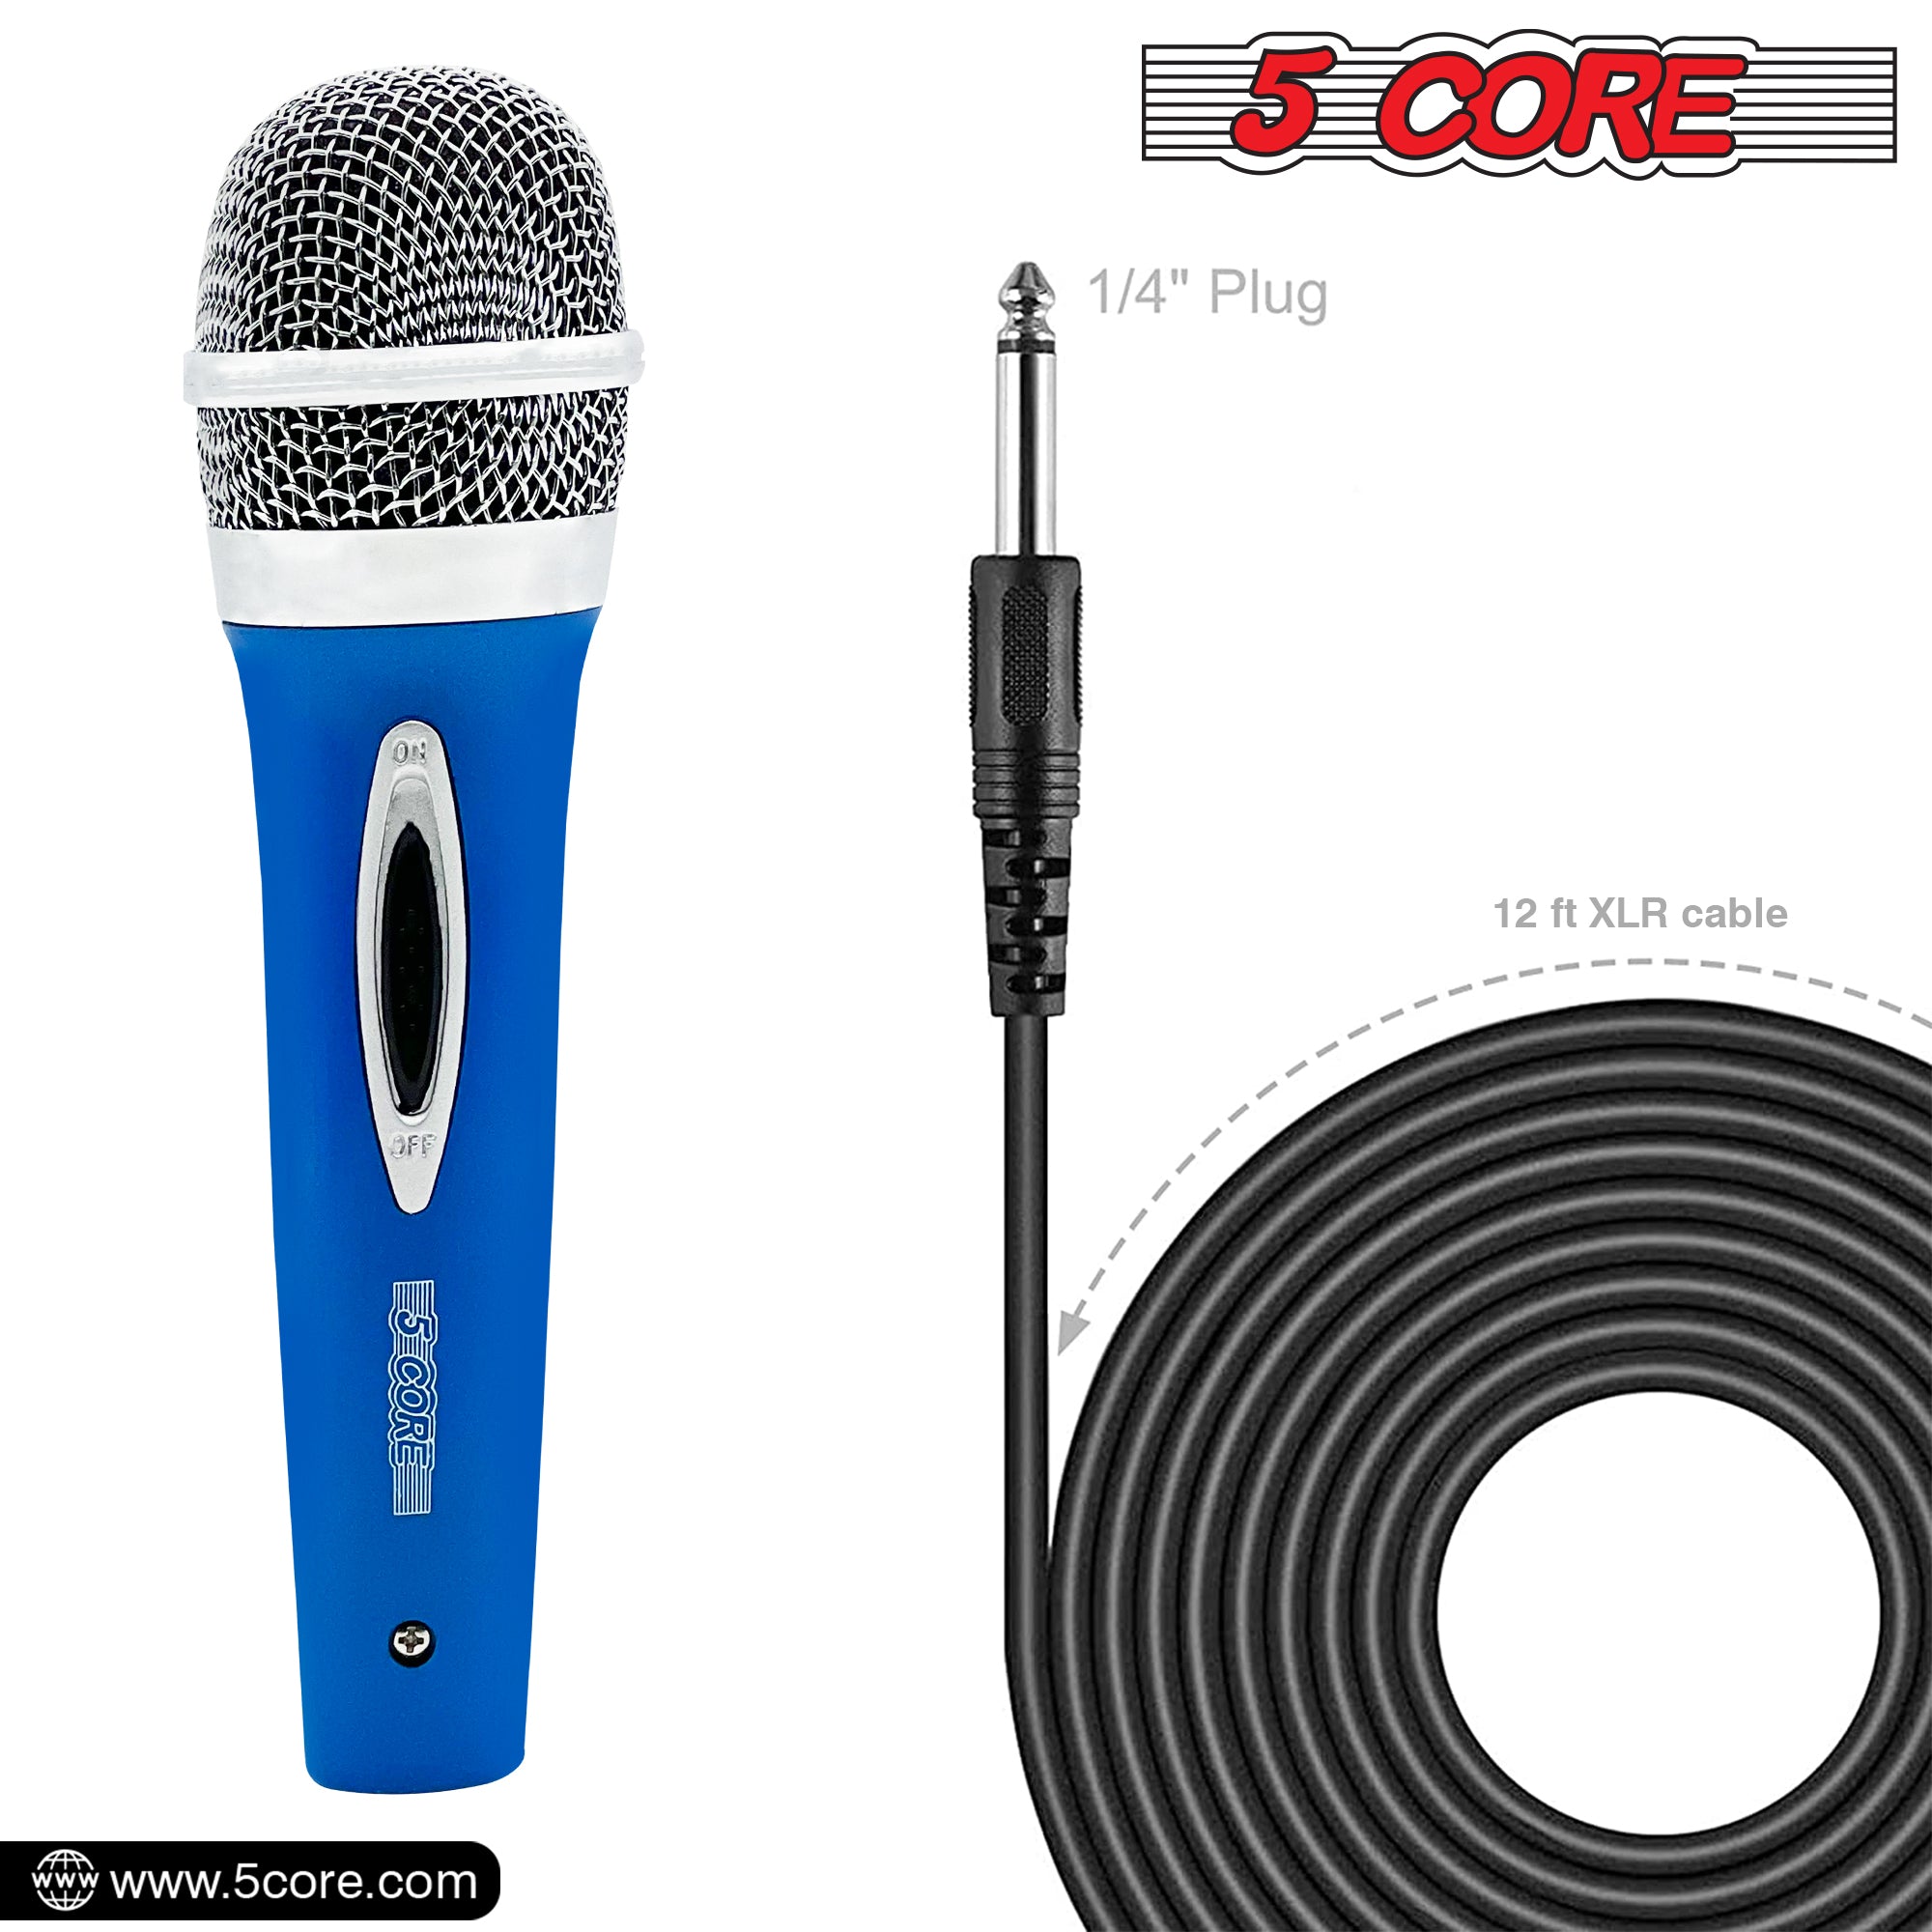 5 Core Microphone 1 Piece Blue Karaoke XLR Wired Mic Professional Studio Microfonos w ON/OFF Switch Integrated Pop Filter Dynamic Moving Coil Cardioid Unidirectional Pickup Handheld Micrófono for Singing DJ Podcast Speeches Includes Cable - PM 286 BLU